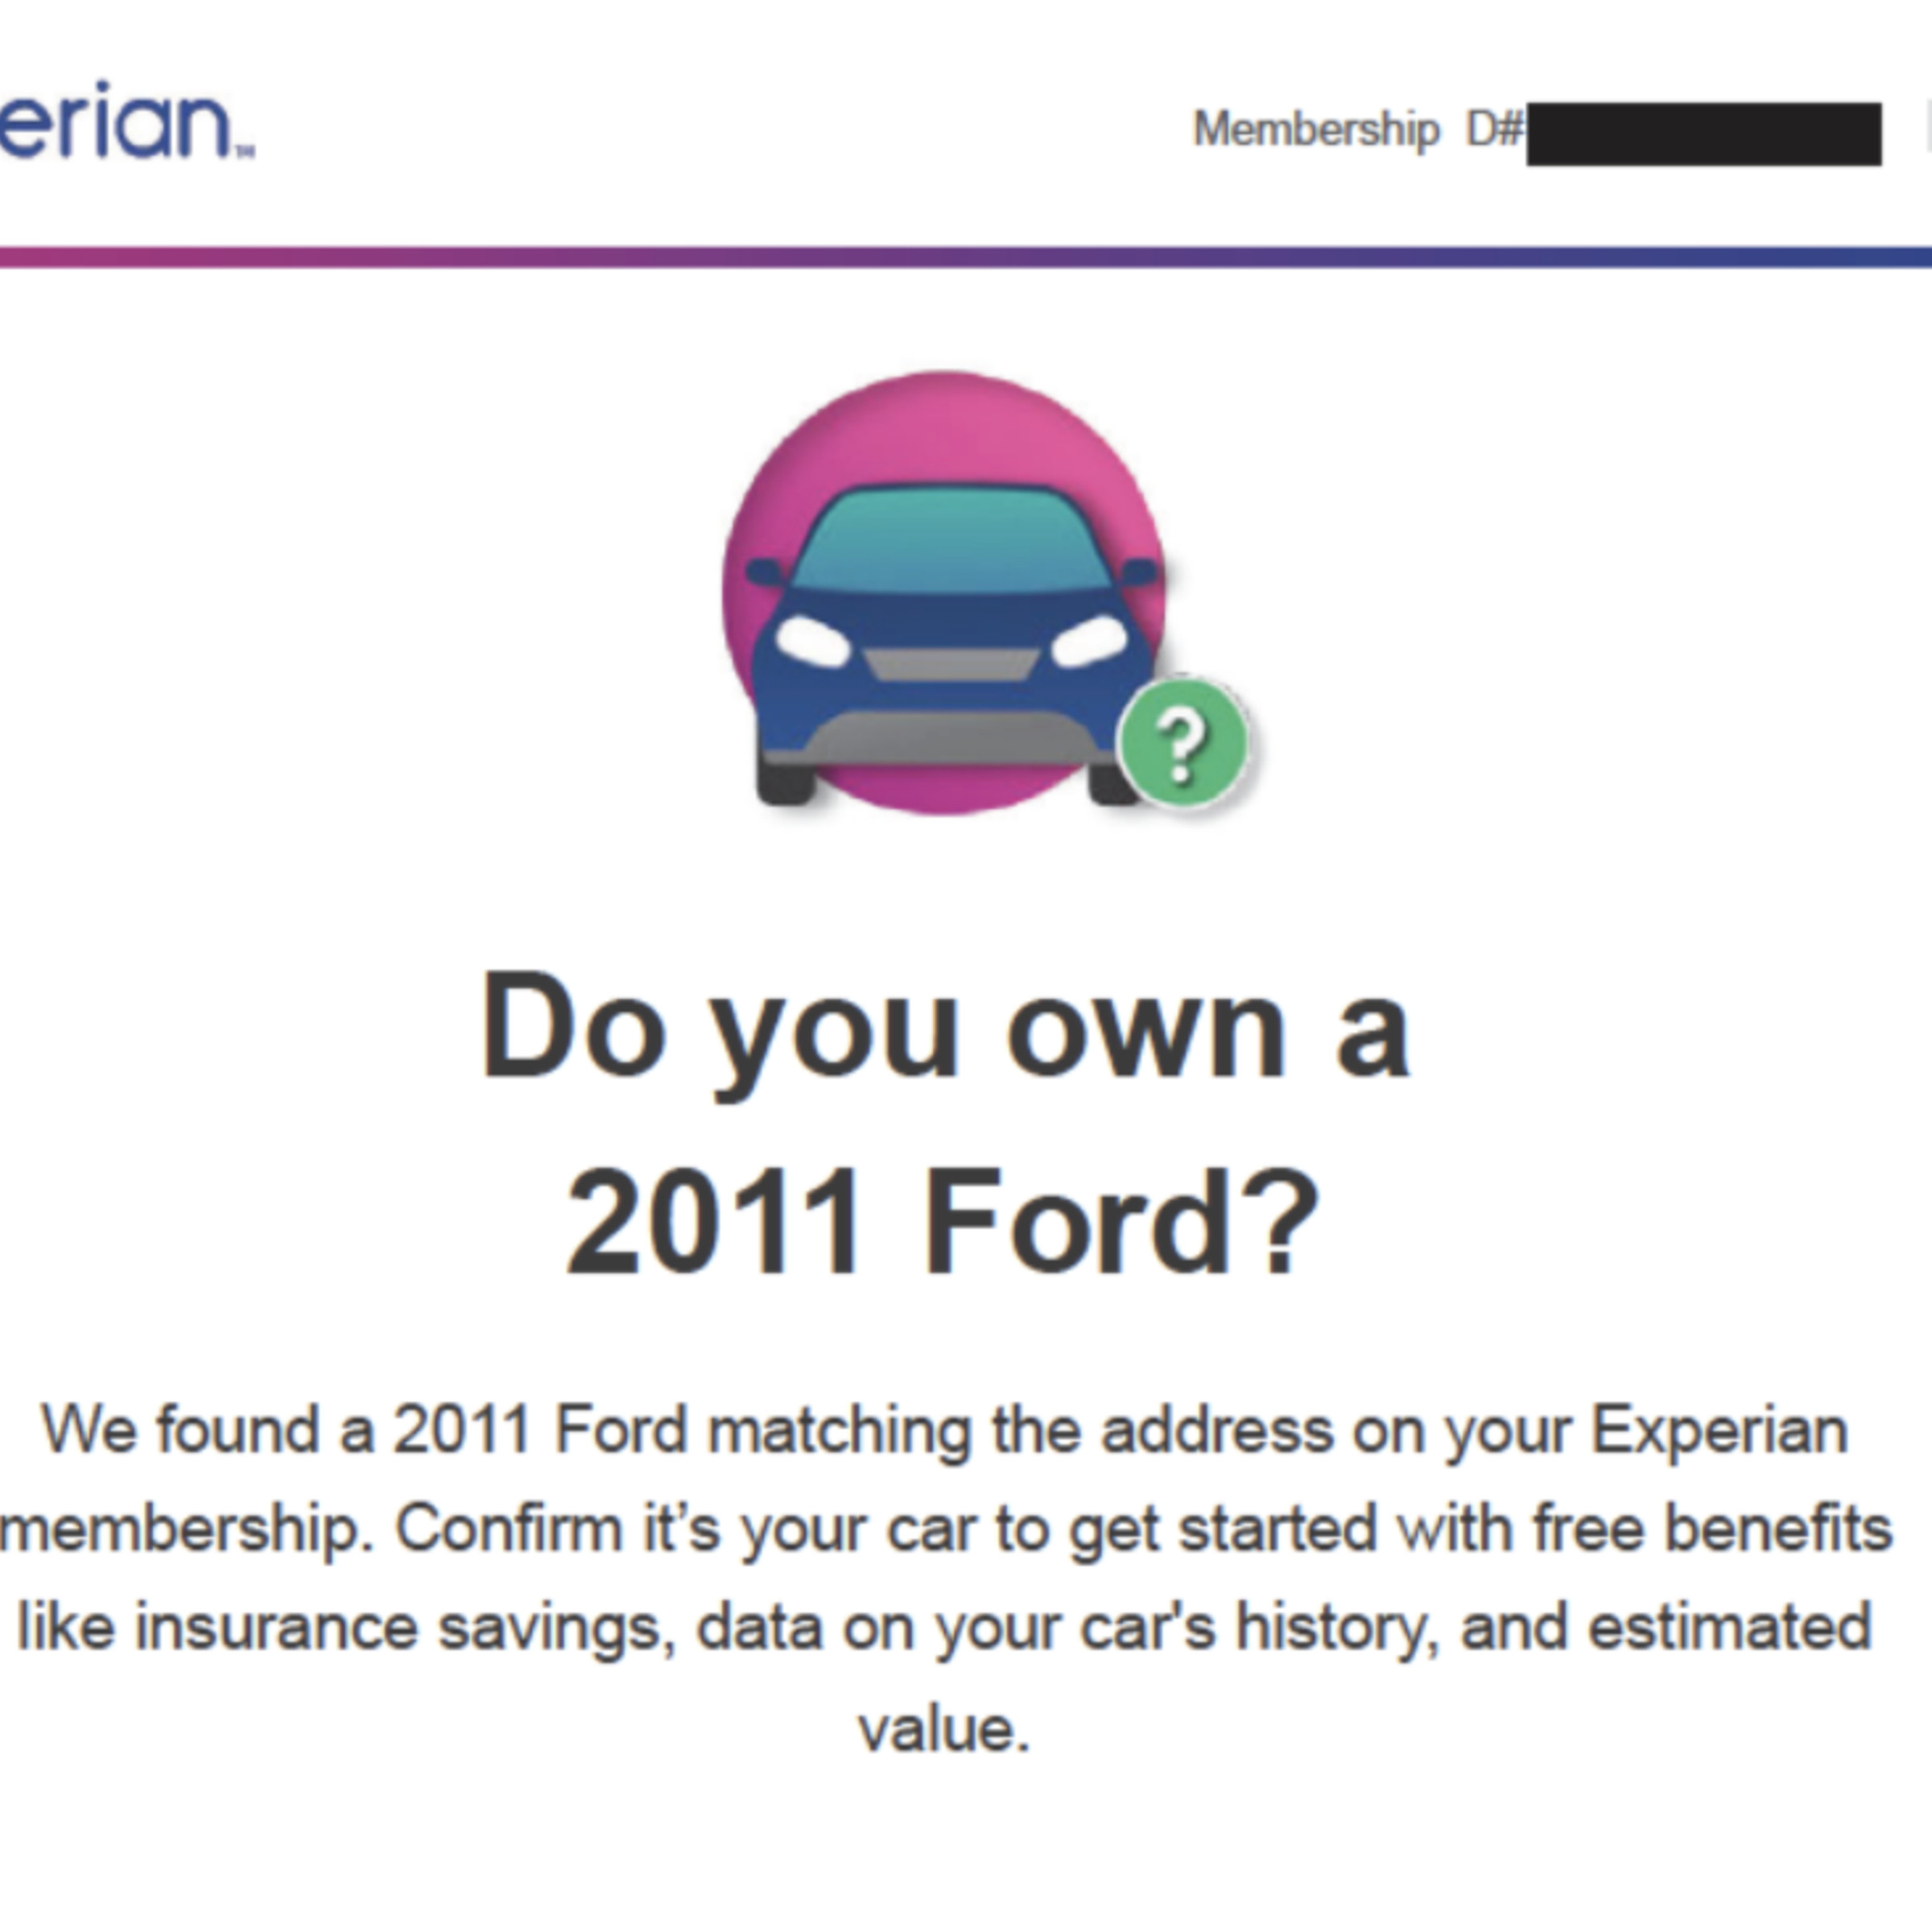 A screenshot of an Experian email with an image of a car, asking if the reader owns a 2011 Ford.